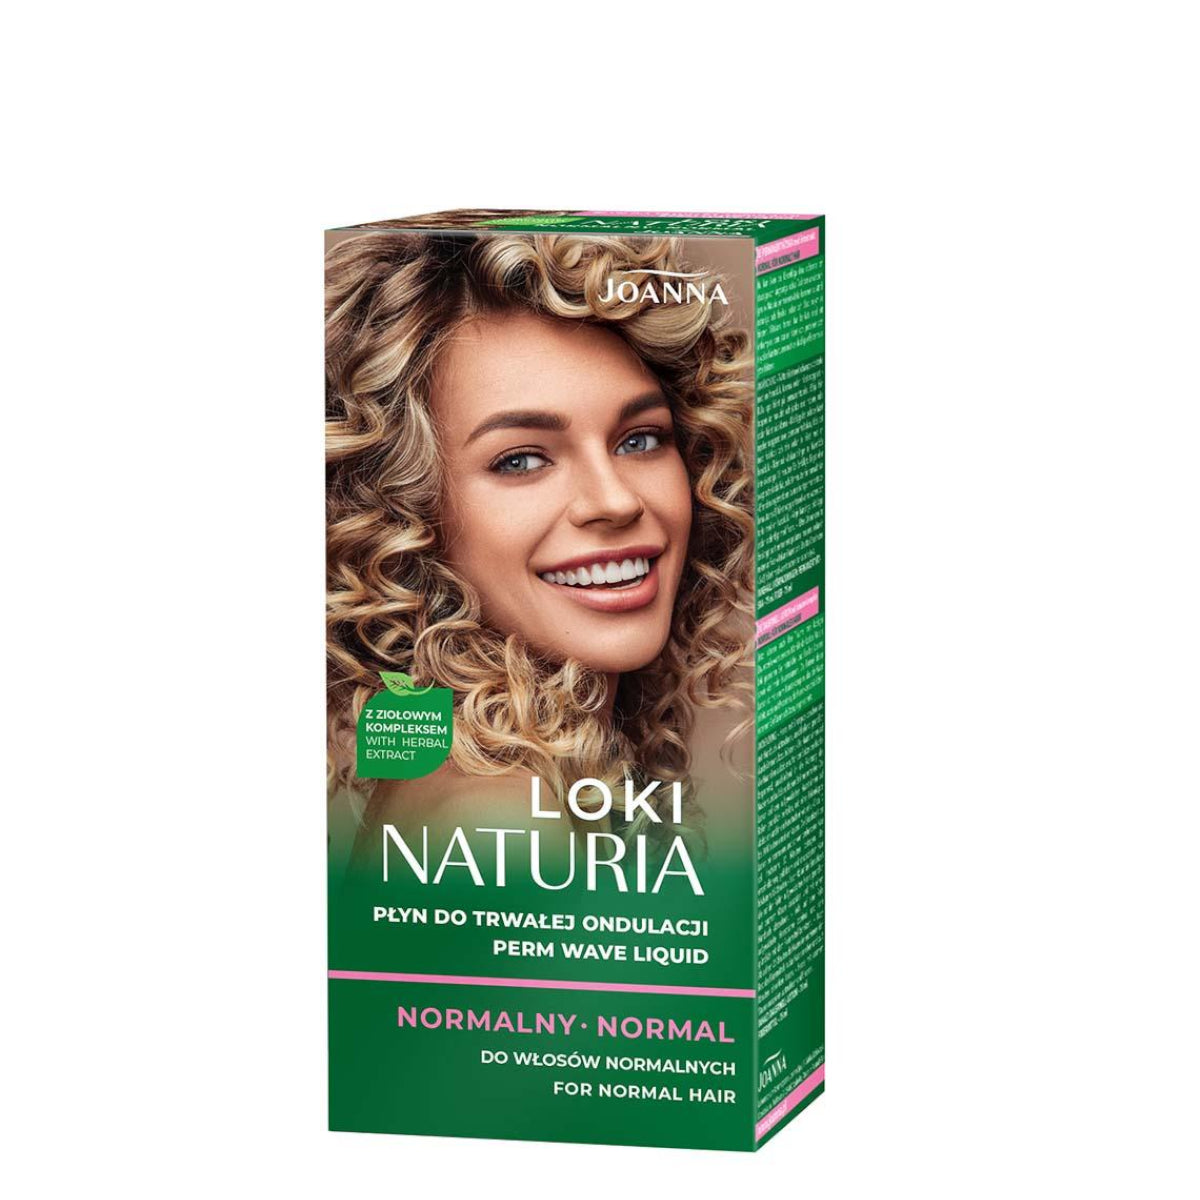 Joanna Naturia Perm Liquid Normal Hair with Herbal Extracts new